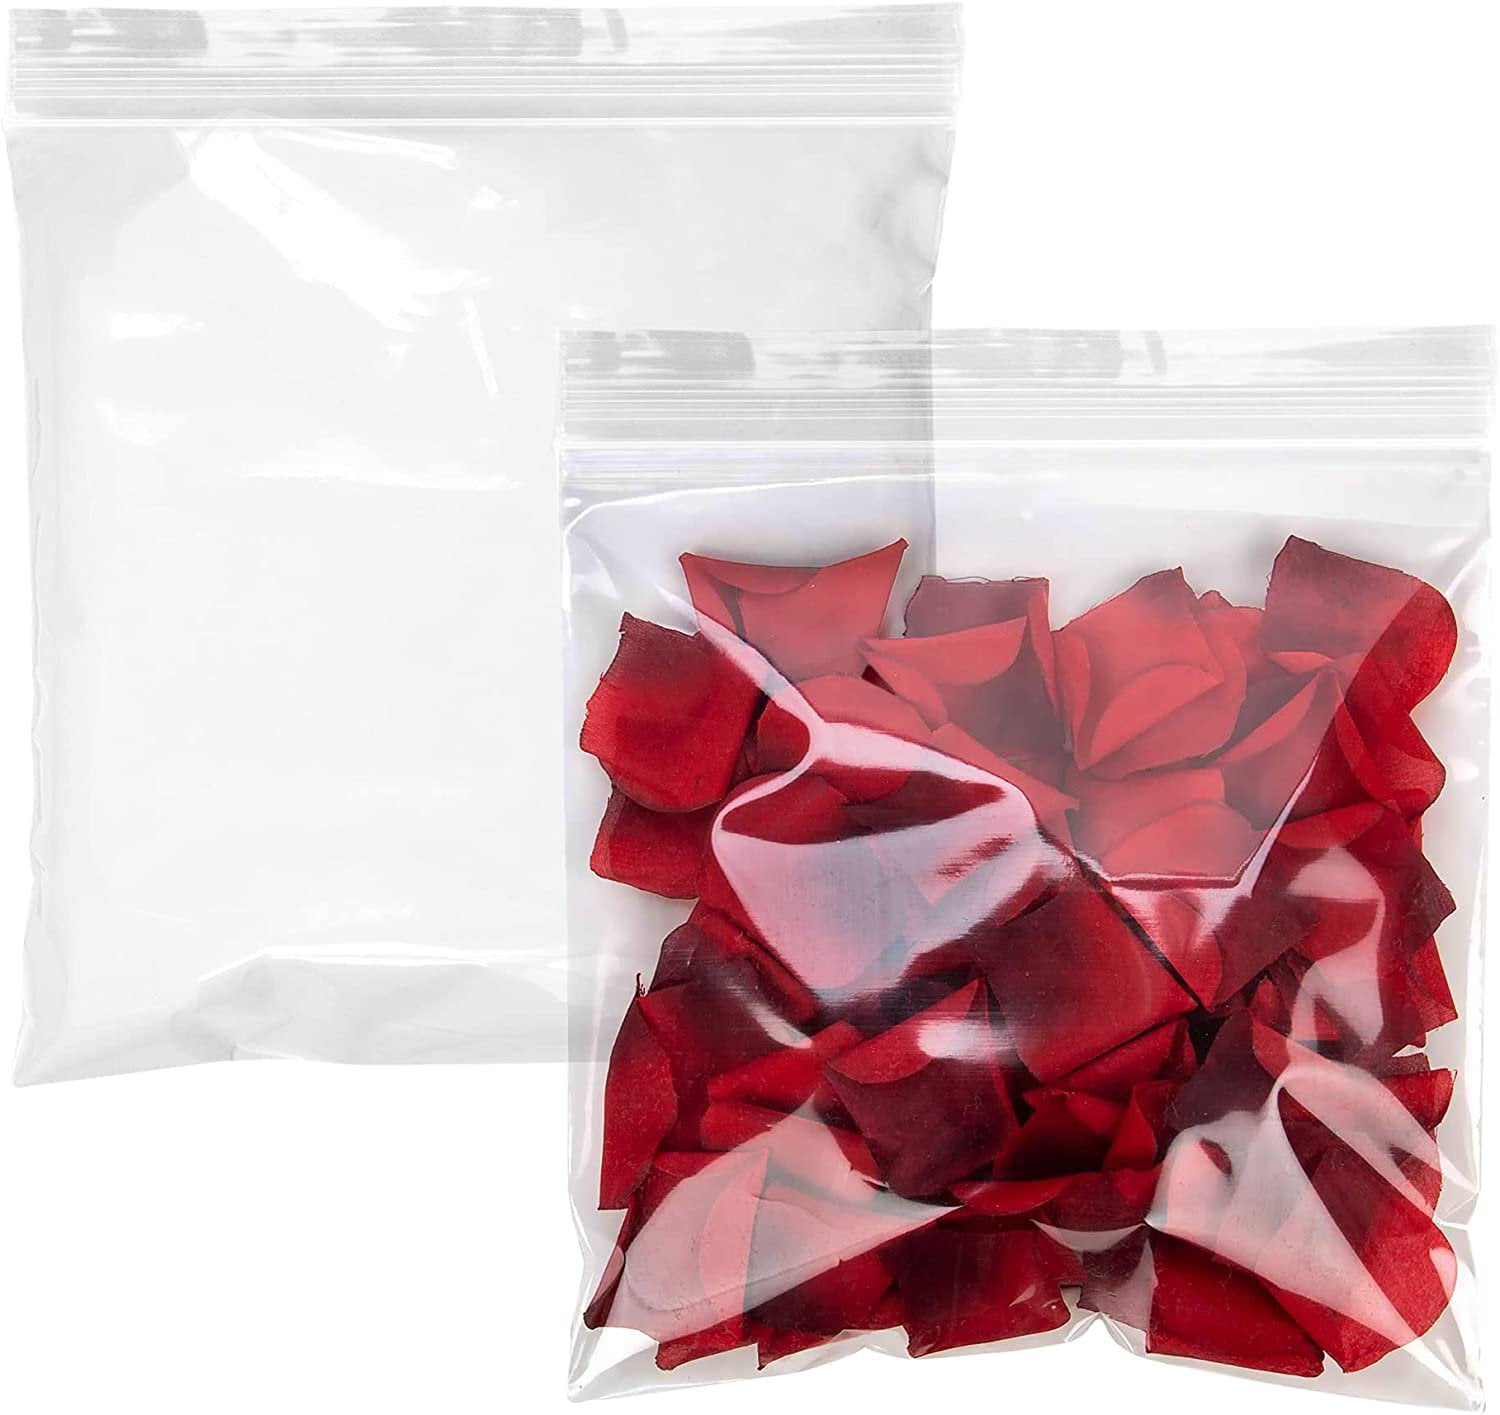 30 x 30 Top Pack Supply Reclosable 6 Mil Poly Bags Clear, Pack of 100 